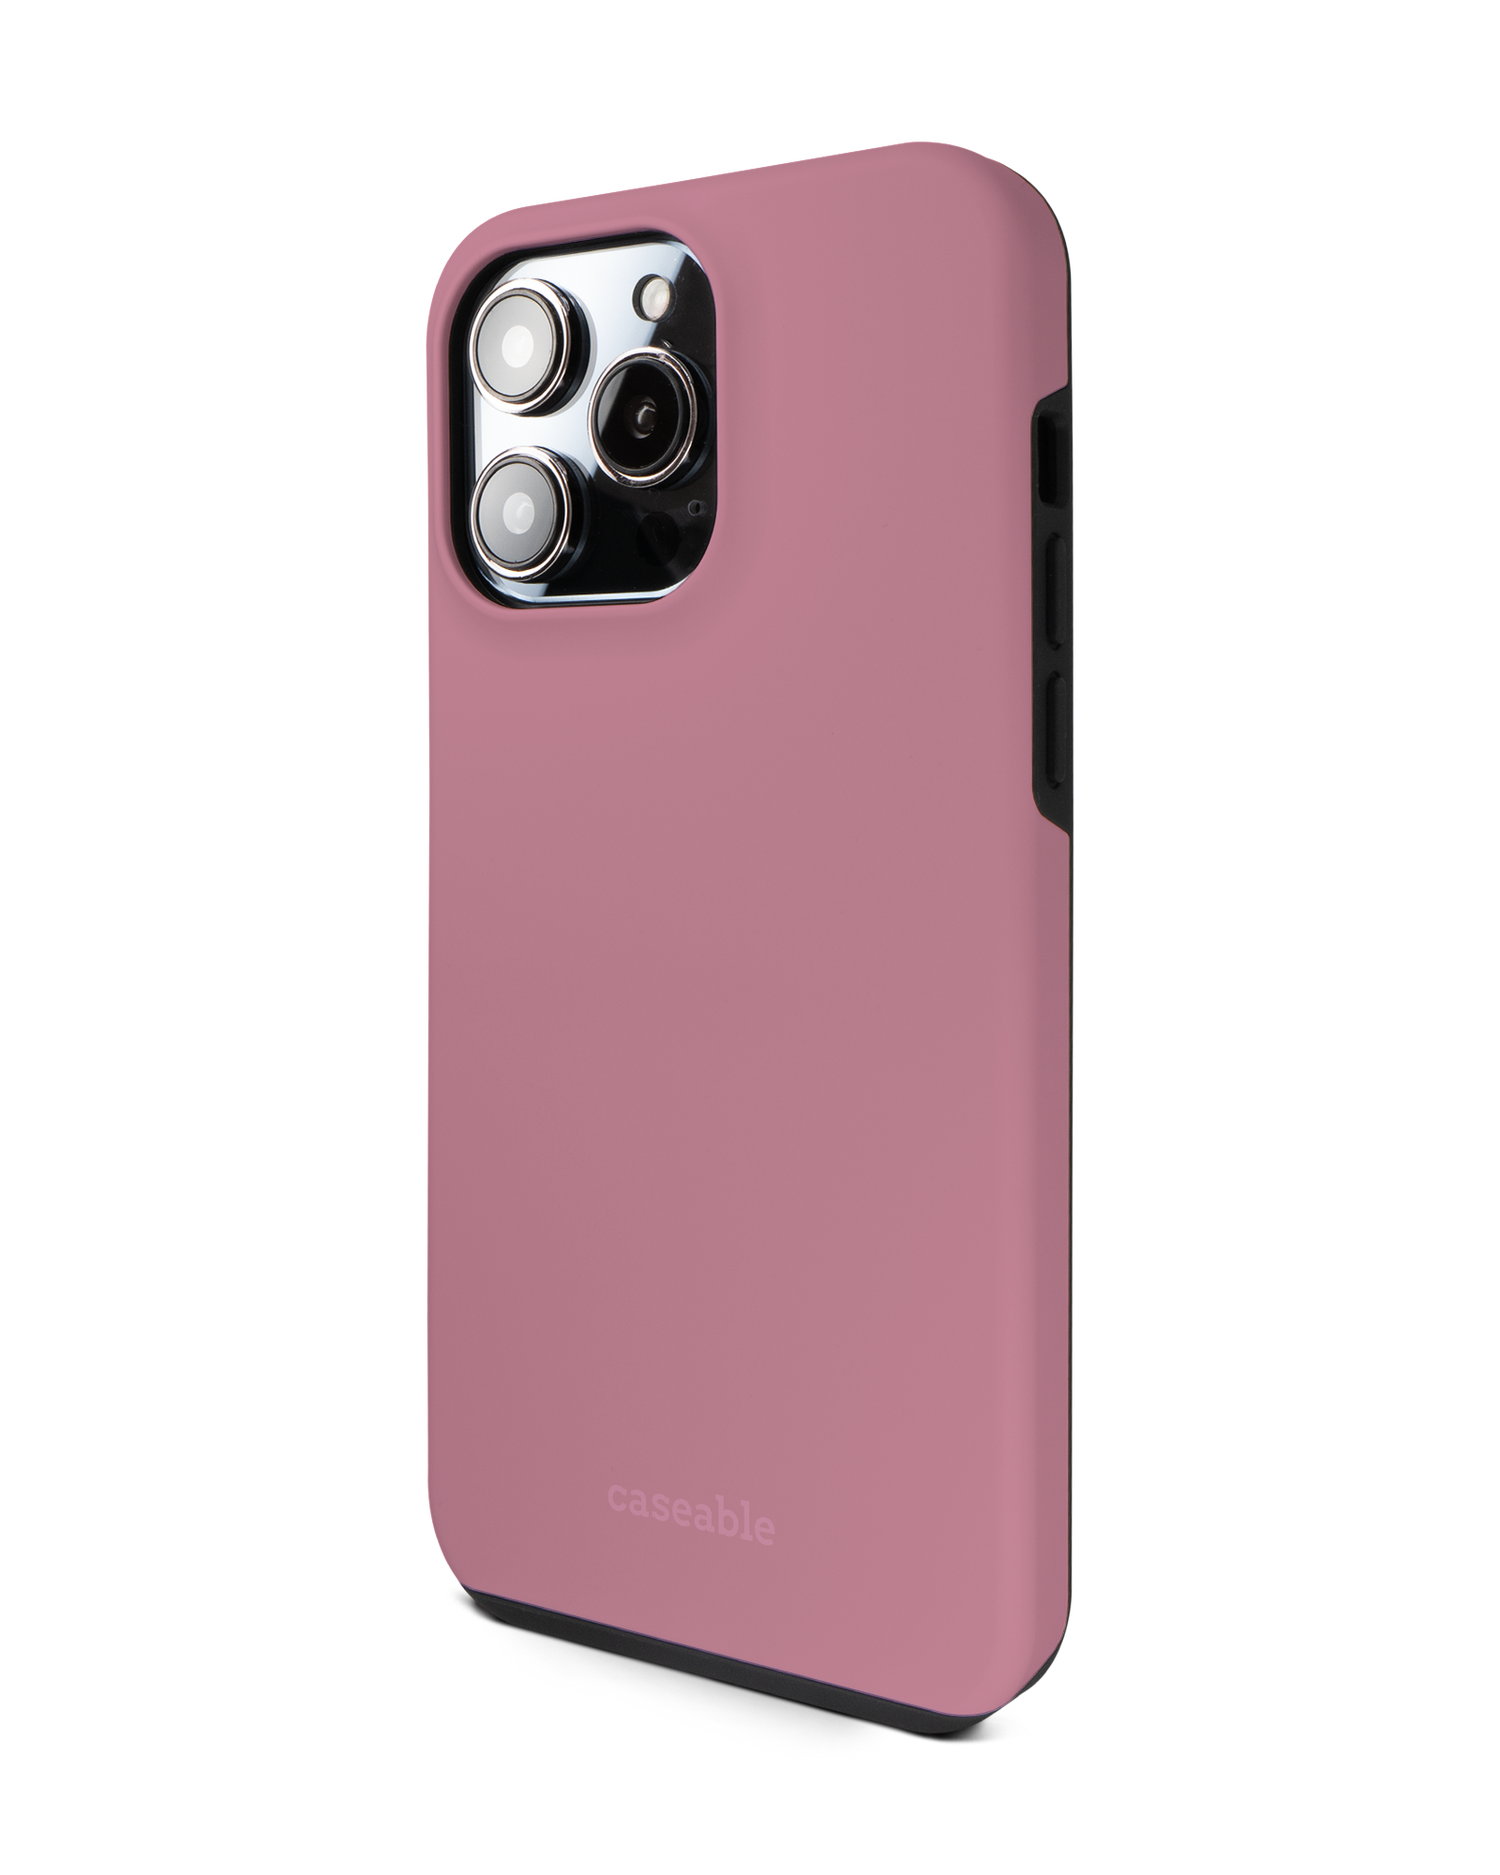 WILD ROSE Premium Phone Case for Apple iPhone 14 Pro Max: View from the right side